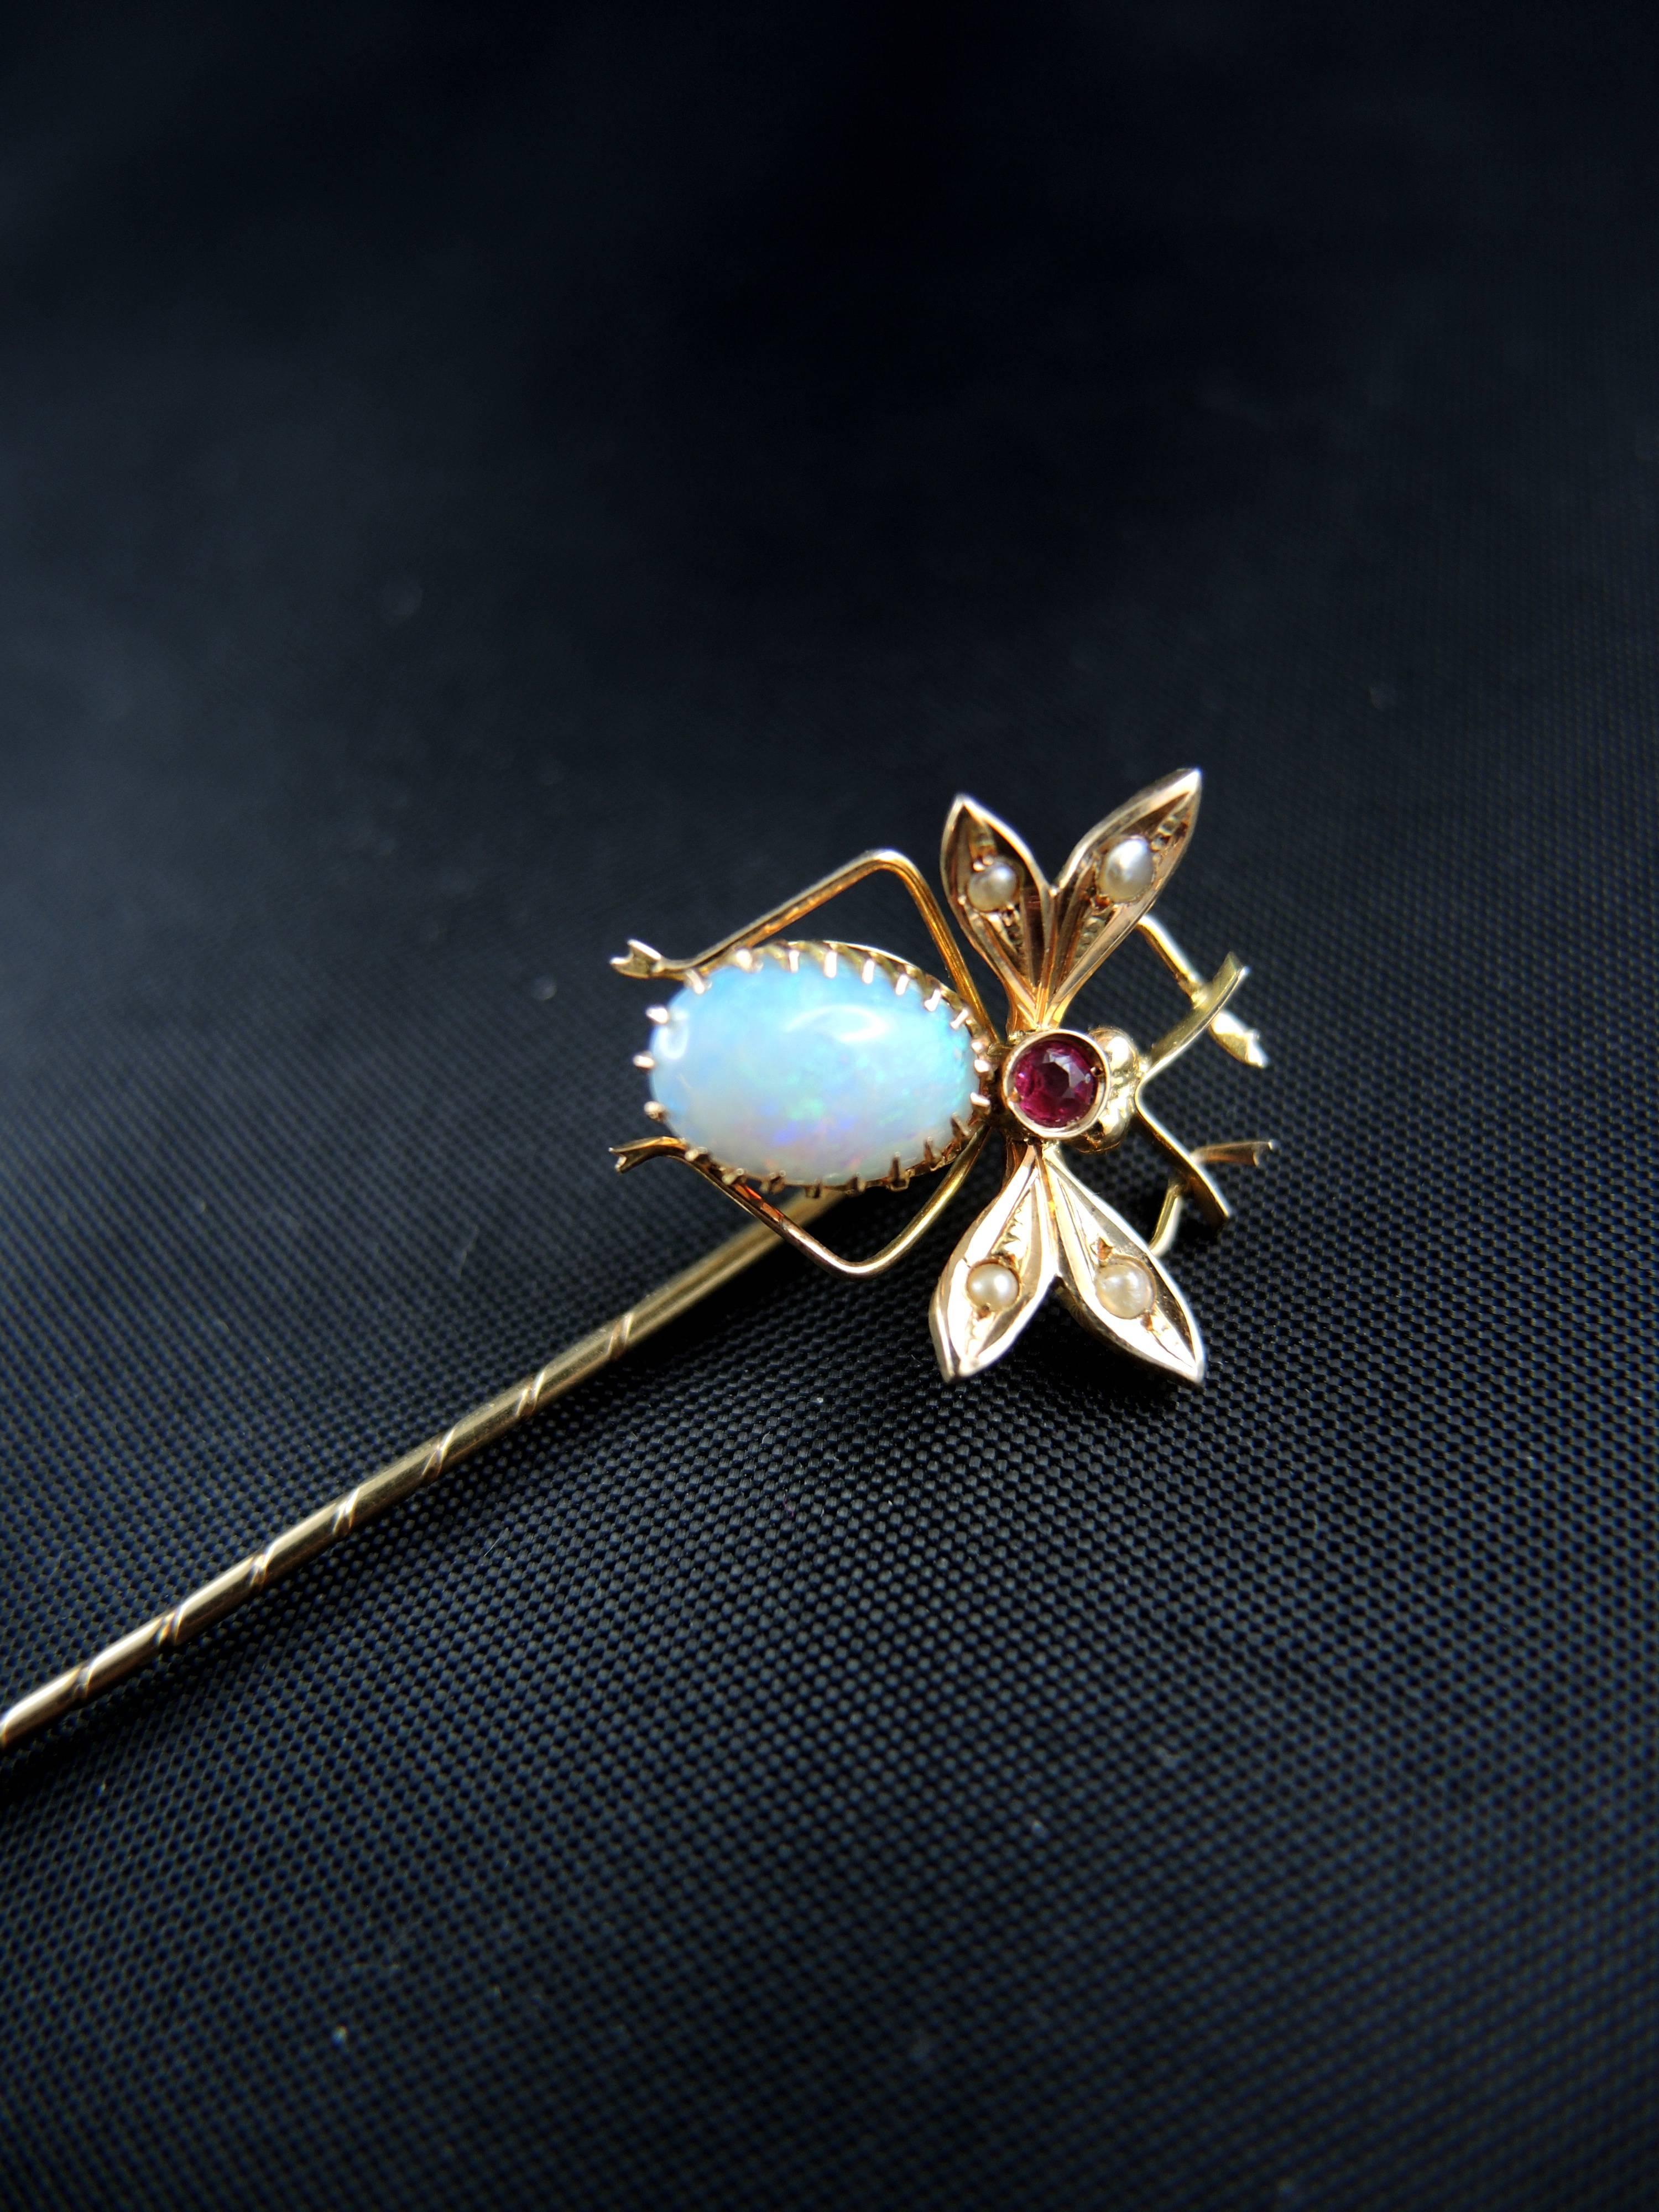 14kt yellow gold antique pin (quality mark: scallop) showing an insect who's body is set with an opal's cabochon, a red stone, and the wings with natural seed pearls. 

Work from the 19th century.

Weight: 1,50 g
Lenght: 6,50 cm

State : very little